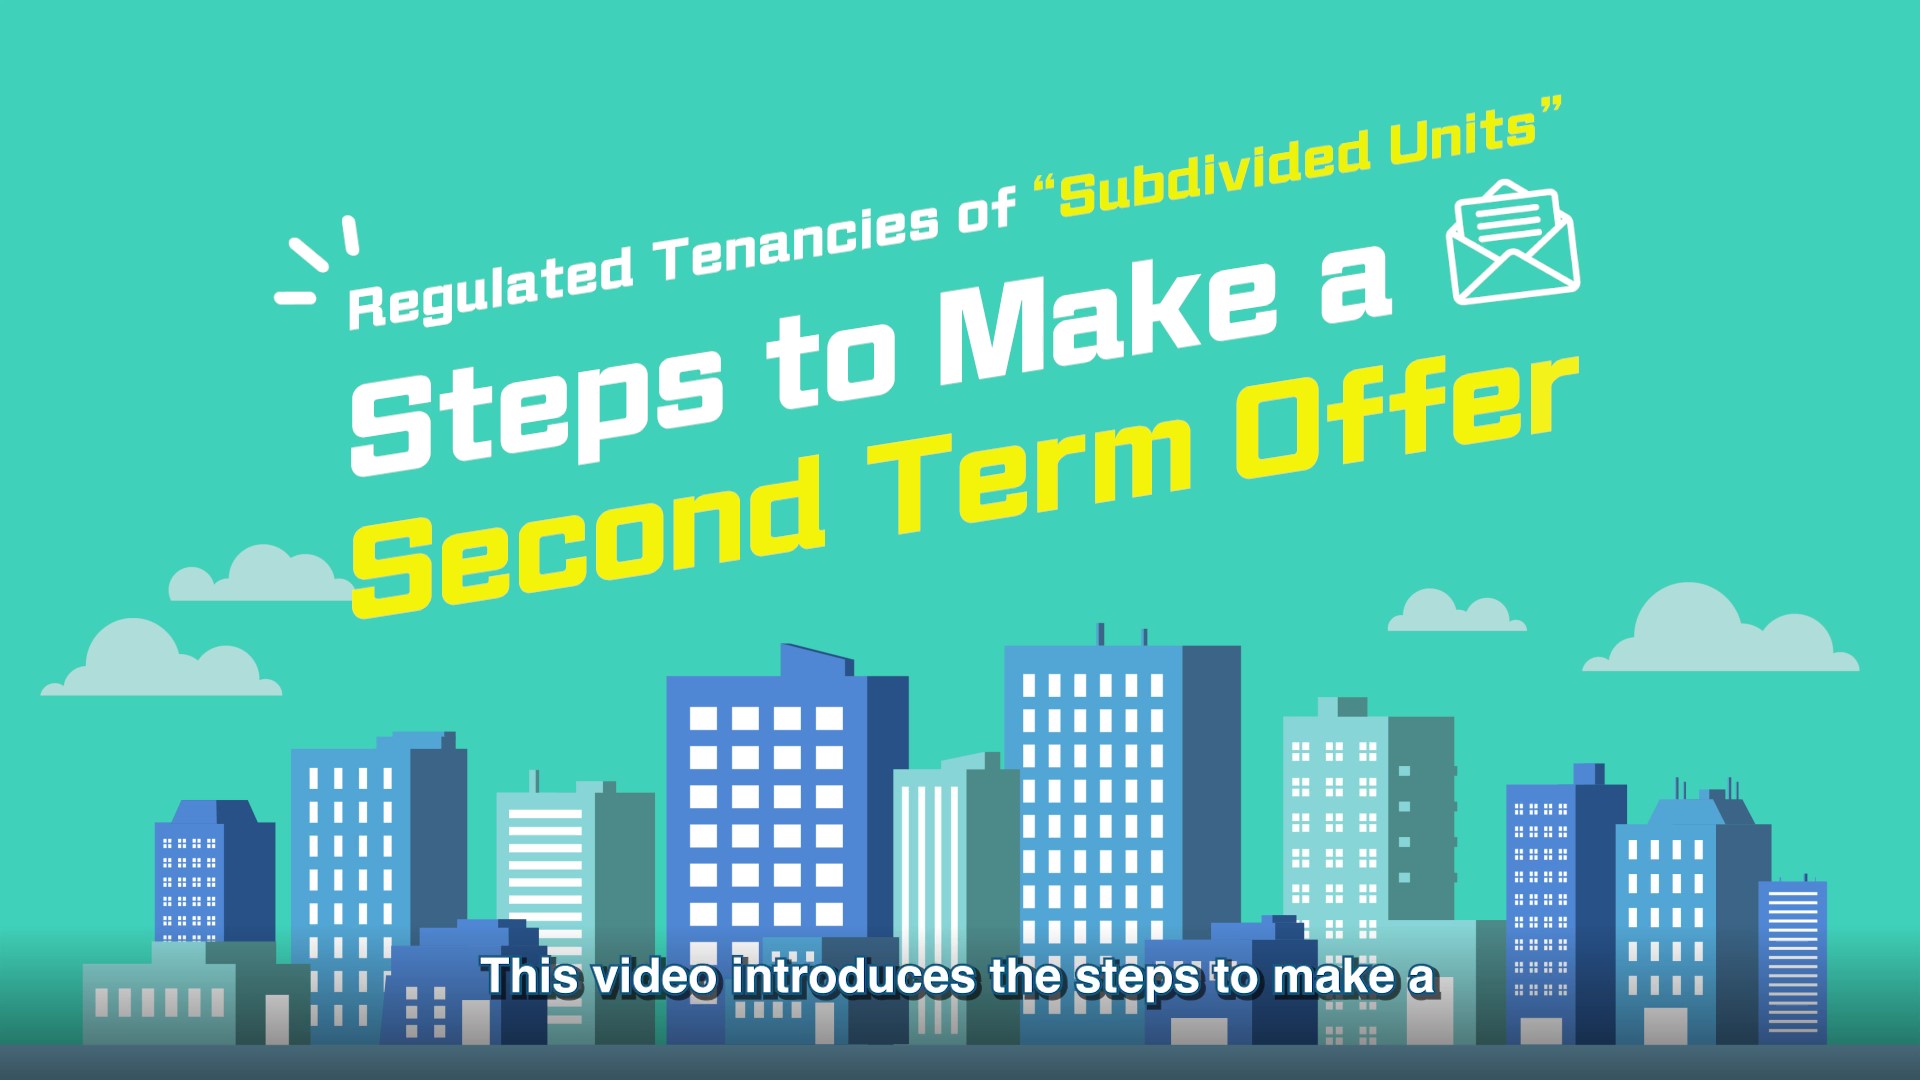 Tutorial Video: Regulated Tenancies of Subdivided Units - Steps to Make a Second Term Offer